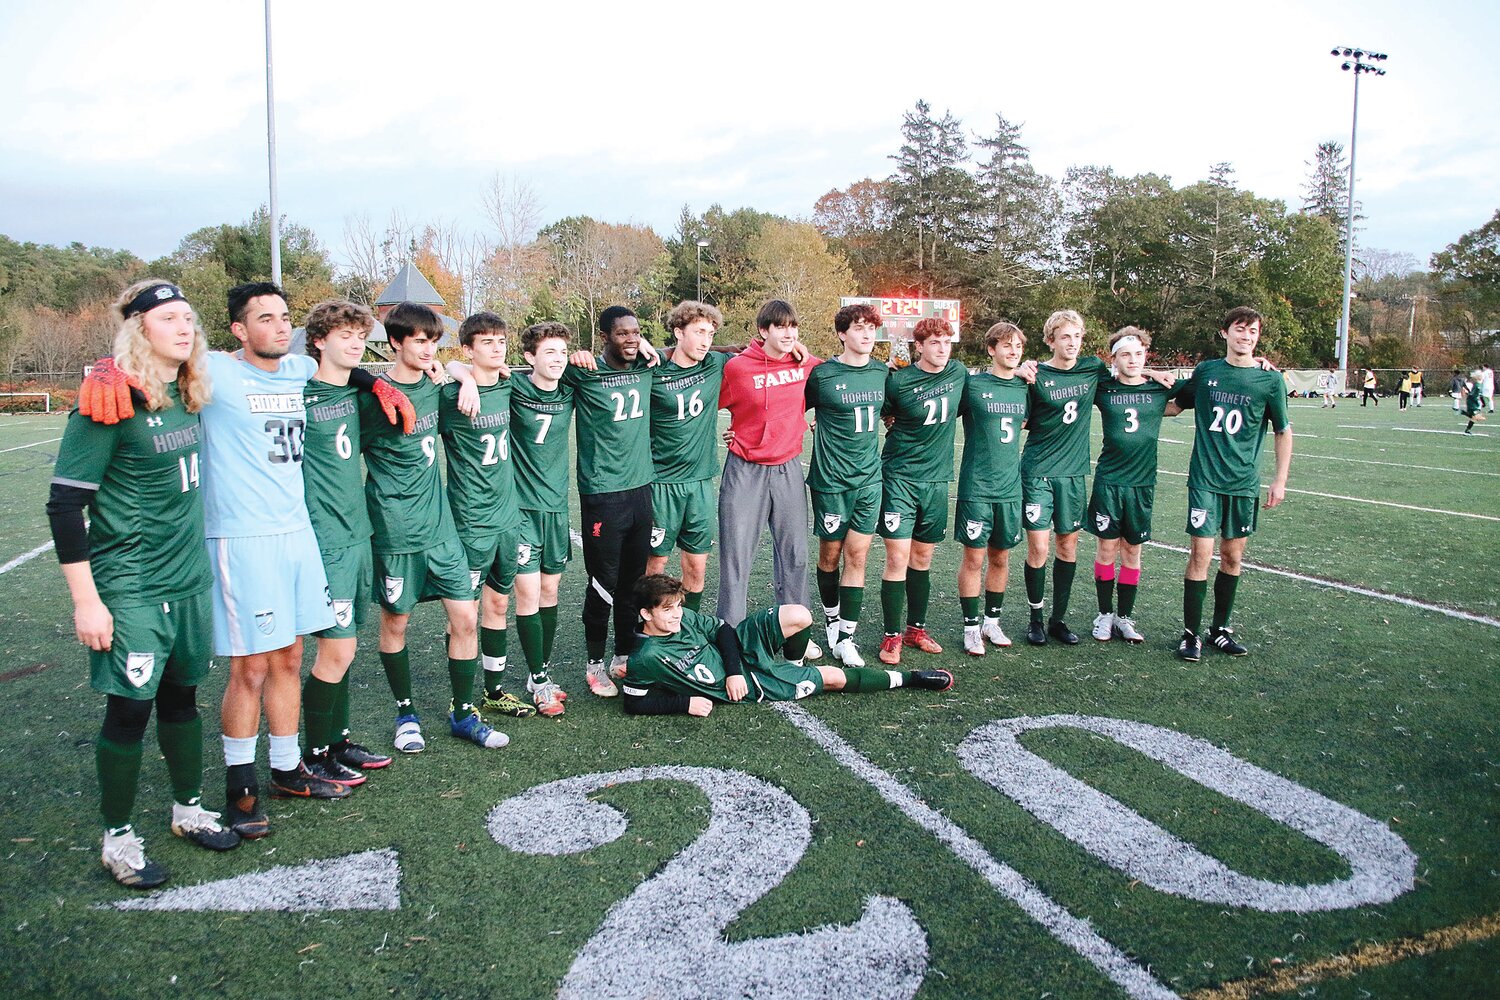 On October 28, the ME Hornets celebrated Senior Night at Hyland Field. The players present their parents with bouquets of flowers thanking them for the hours of time they have dedicated to the boys’ athletic and scholastic endeavors.The boys defeated Ipswich to secure their fifth CAL Baker title in the last six seasons. Pictured left to right; Simon Rubin, Theodoros Parianos,Jagger Nowak, Theo Brown, Gus Brown,Jackson Cawley,Naderson Curtis, Andrew Amigo,Anton Westrick, Gannon Costello, Aidan Cunningham, Eli Cox,Cameron Light, Cian Doyle, John Pope and front and center, Beren Schmidt.